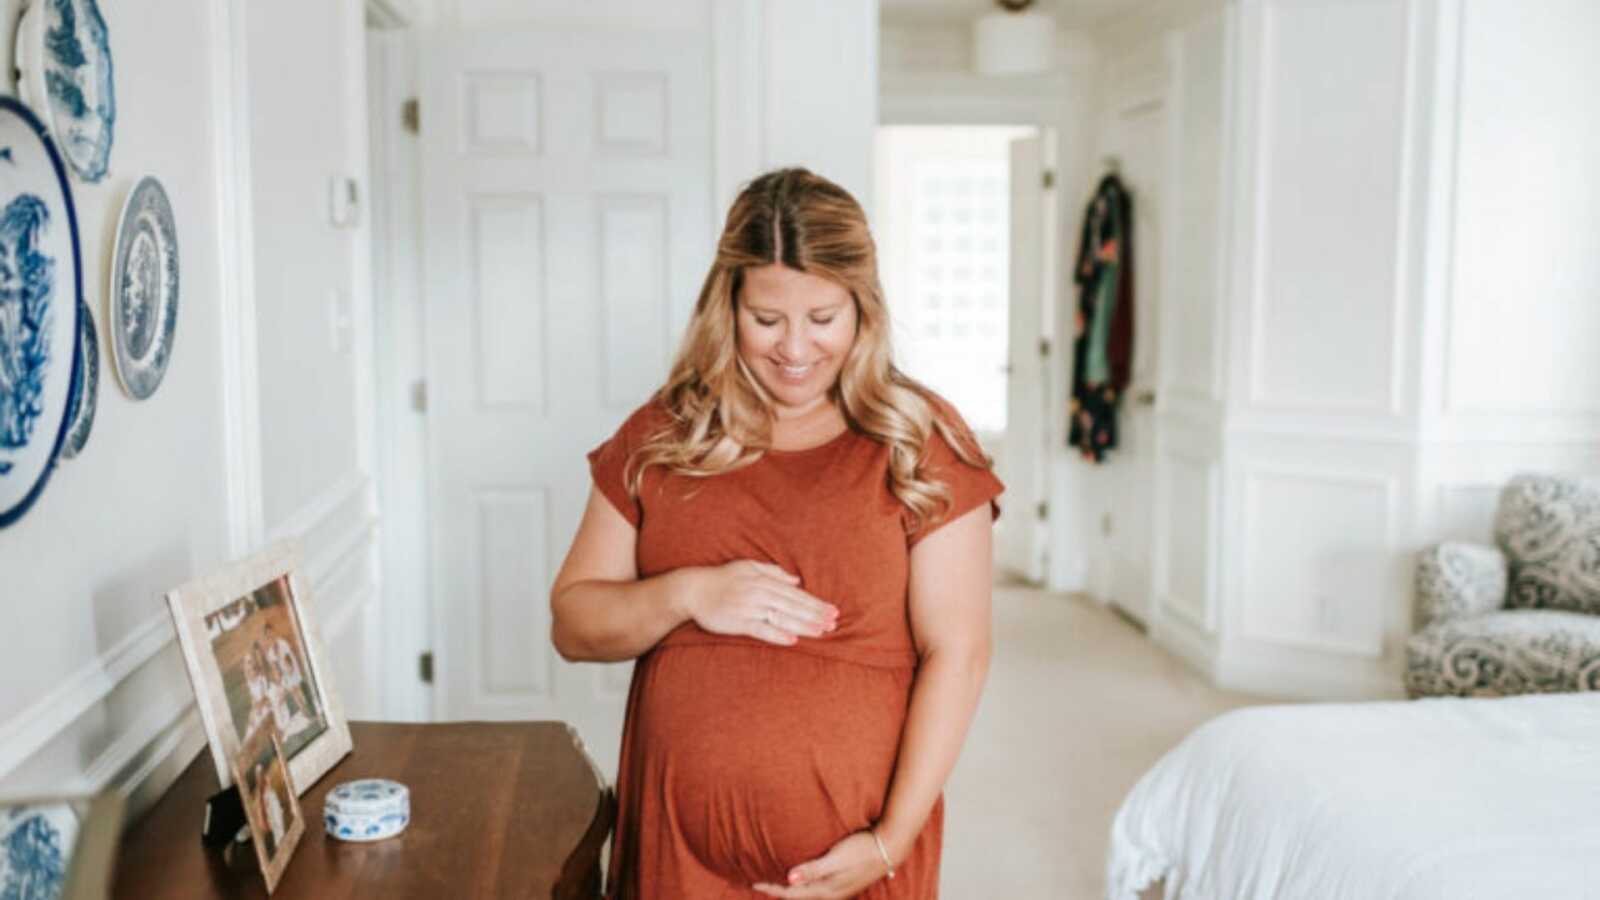 Pregnant woman in an orange dress cradling her belly